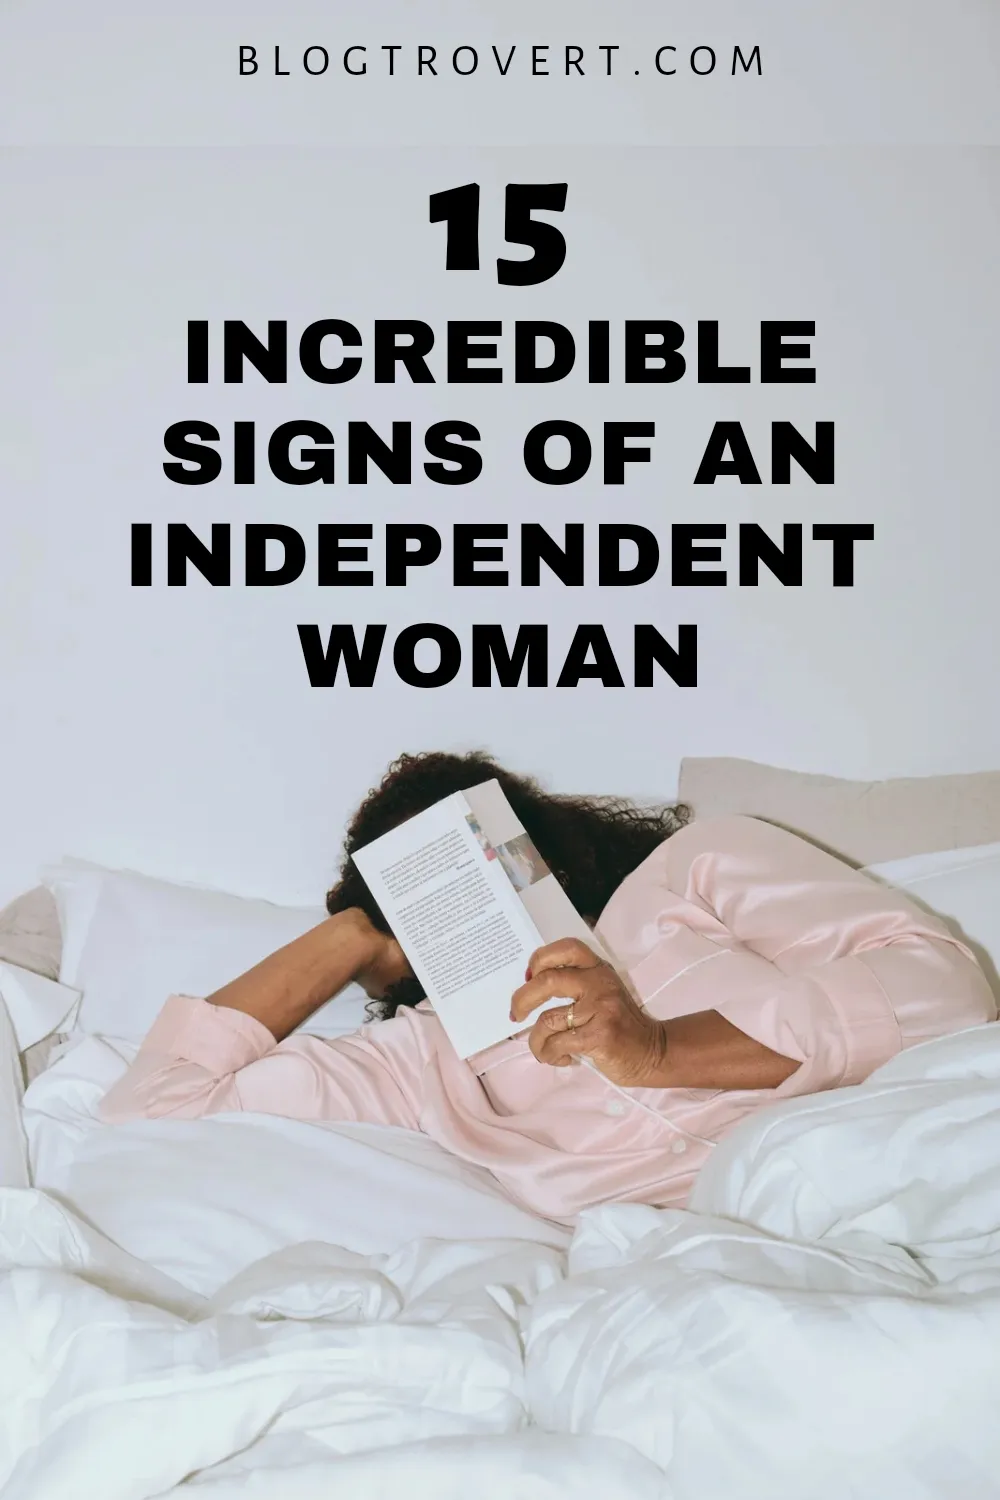 15 characteristics of an independent woman that will inspire you 1